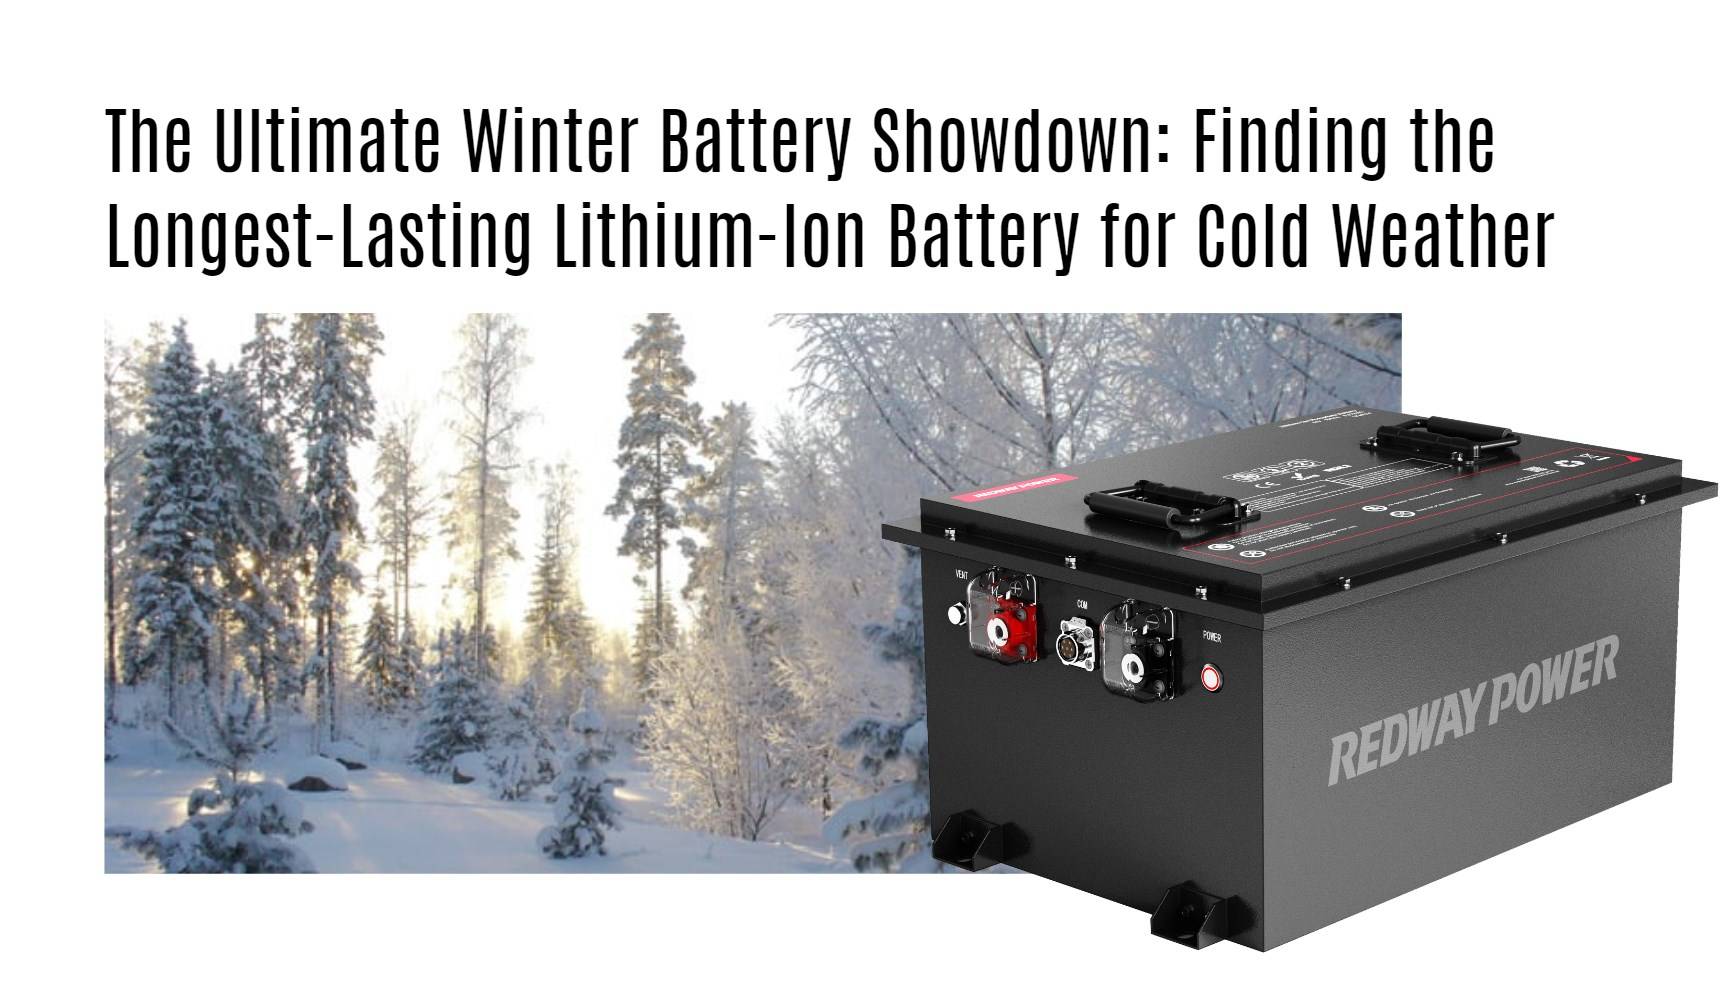 The Ultimate Winter Battery Showdown: Finding the Longest-Lasting Lithium-Ion Battery for Cold Weather 48v 100ah golf cart lithium battery factory manufacturer oem lifepo4 lfp